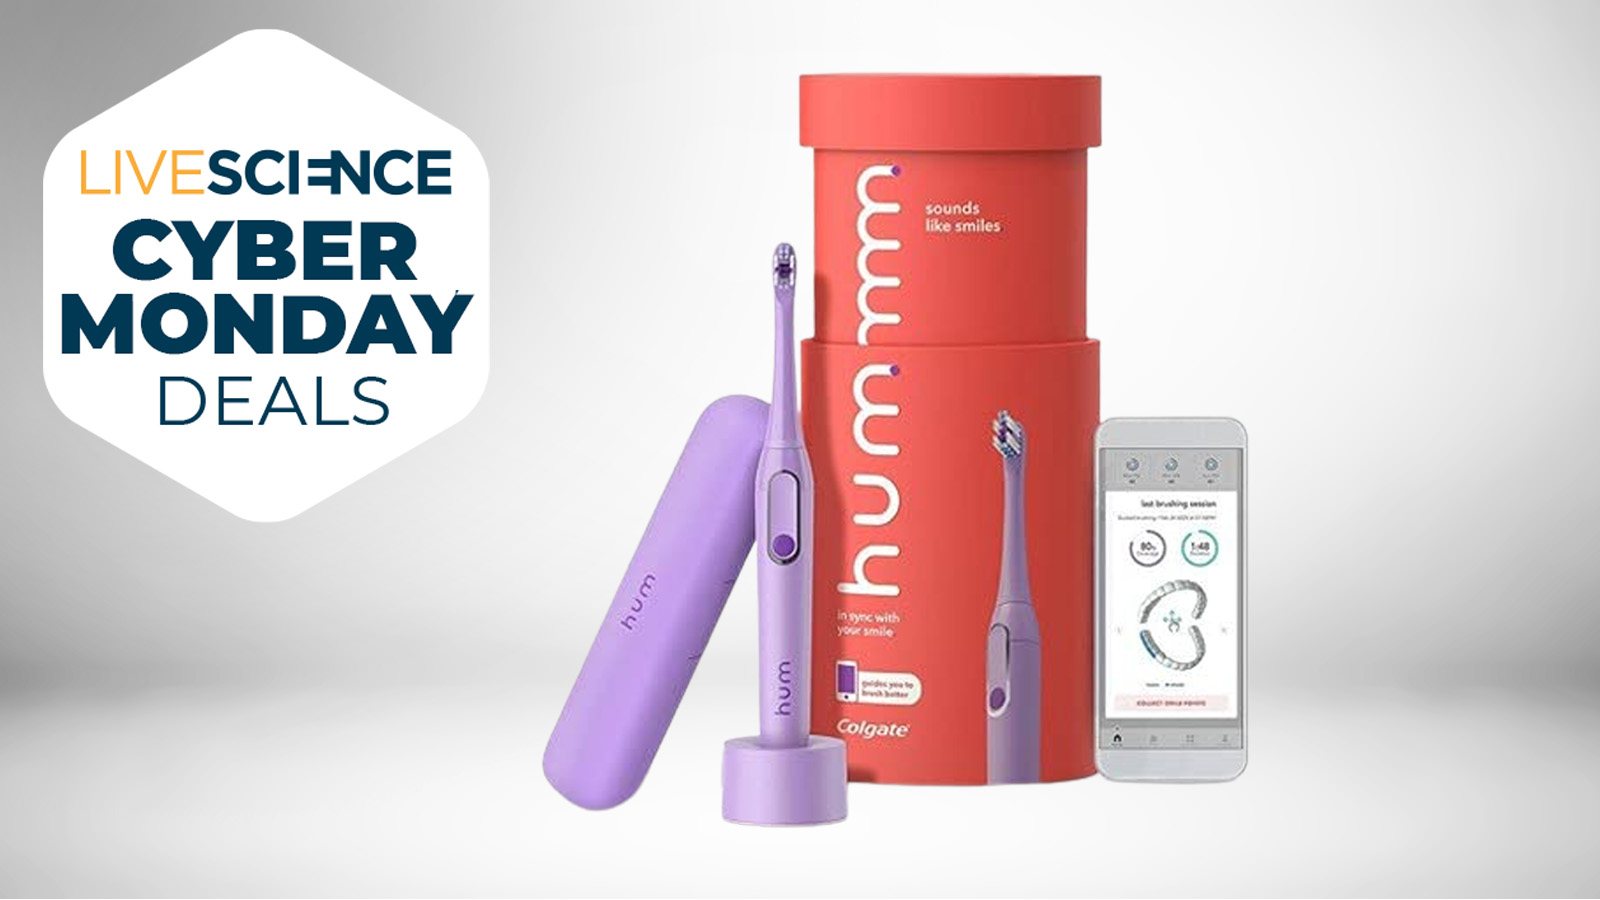 Final chance to save 60% on the top-rated hum by Colgate electric toothbrush for Cyber Monday